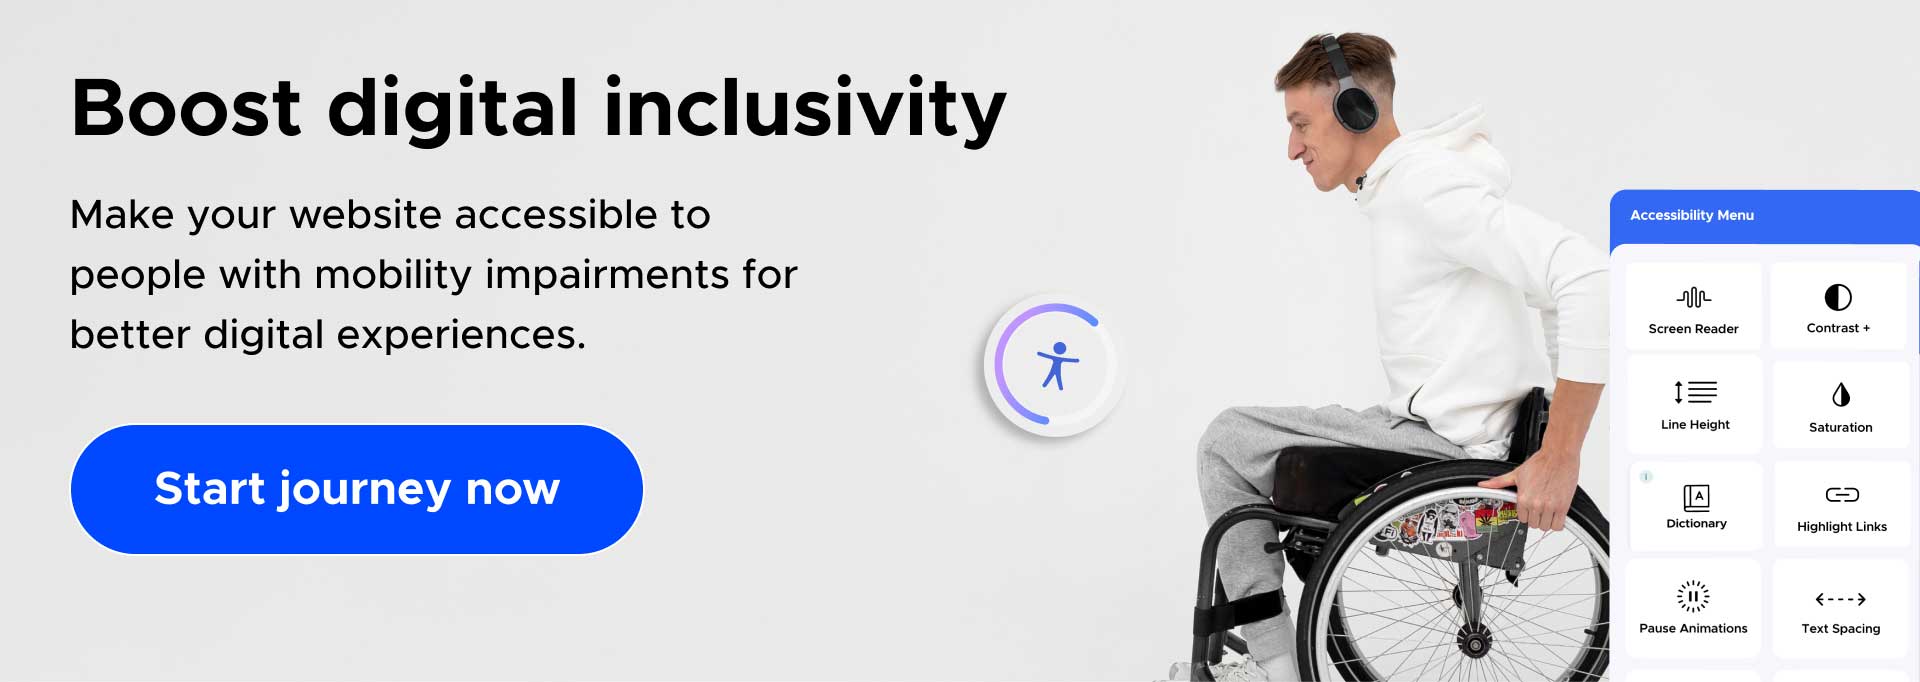 Make your website accessible to people with mobility impairments for better digital experiences.